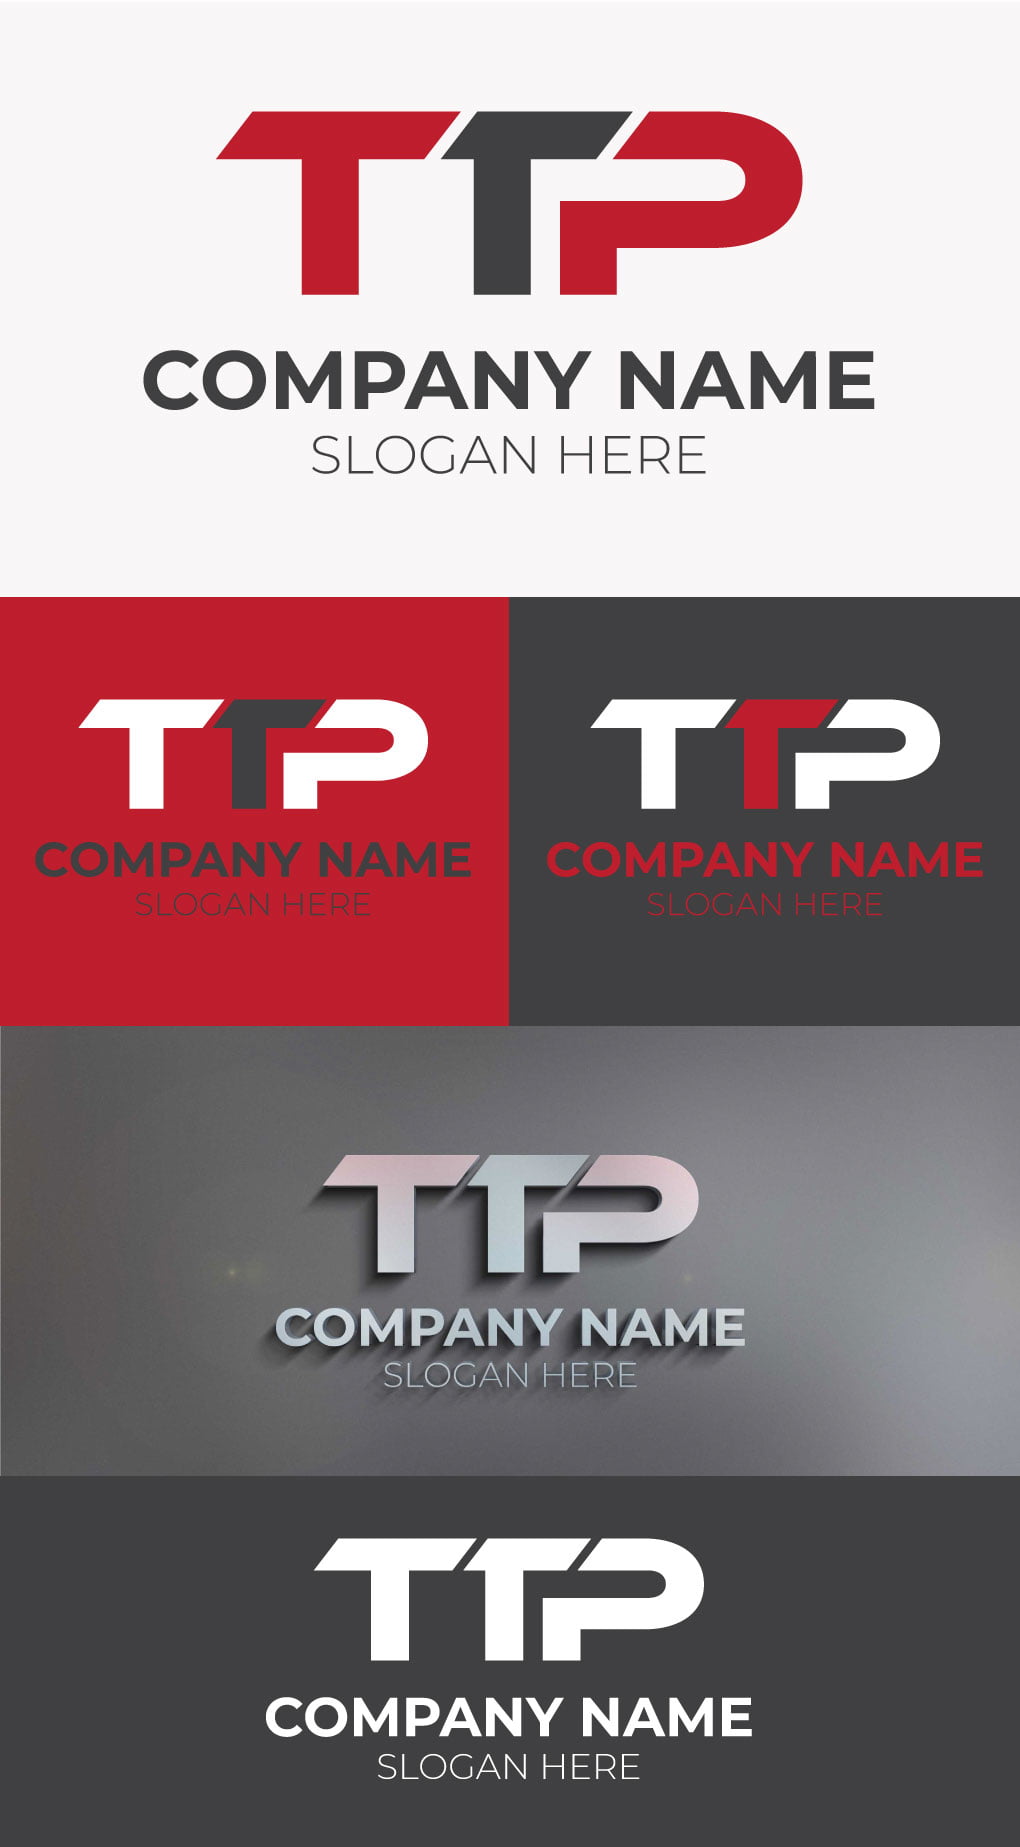 Tp events - need a simple yet colorful modern logo for an events management  company!! | Logo design contest | 99designs